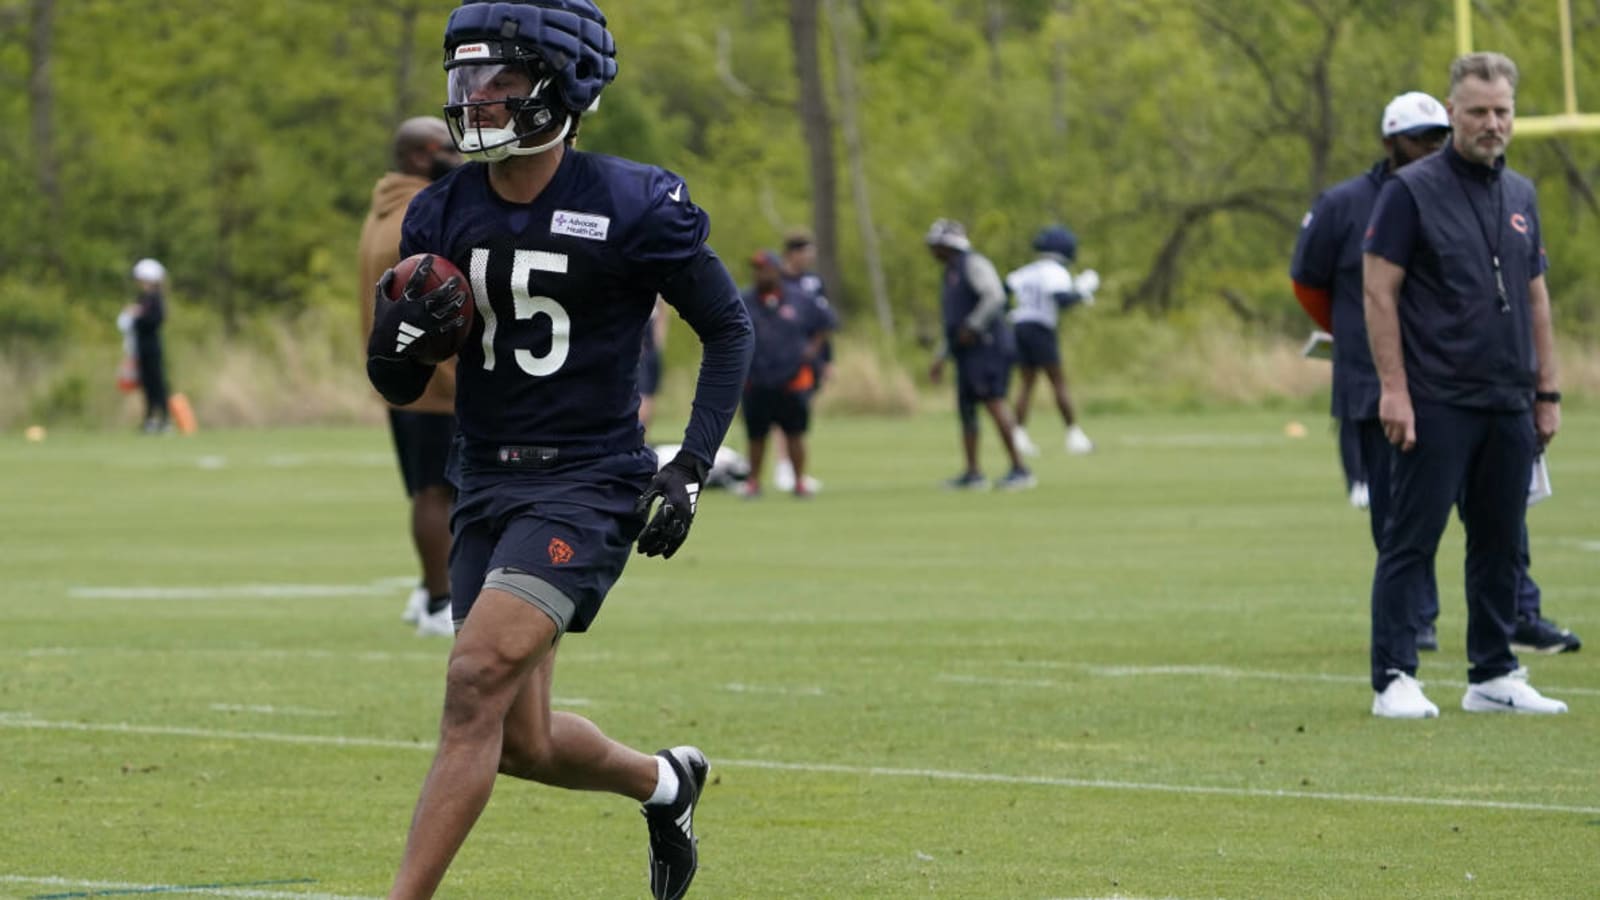 Rome Odunze is working to strengthen his connection with Caleb Williams even more during Bears Minicamp